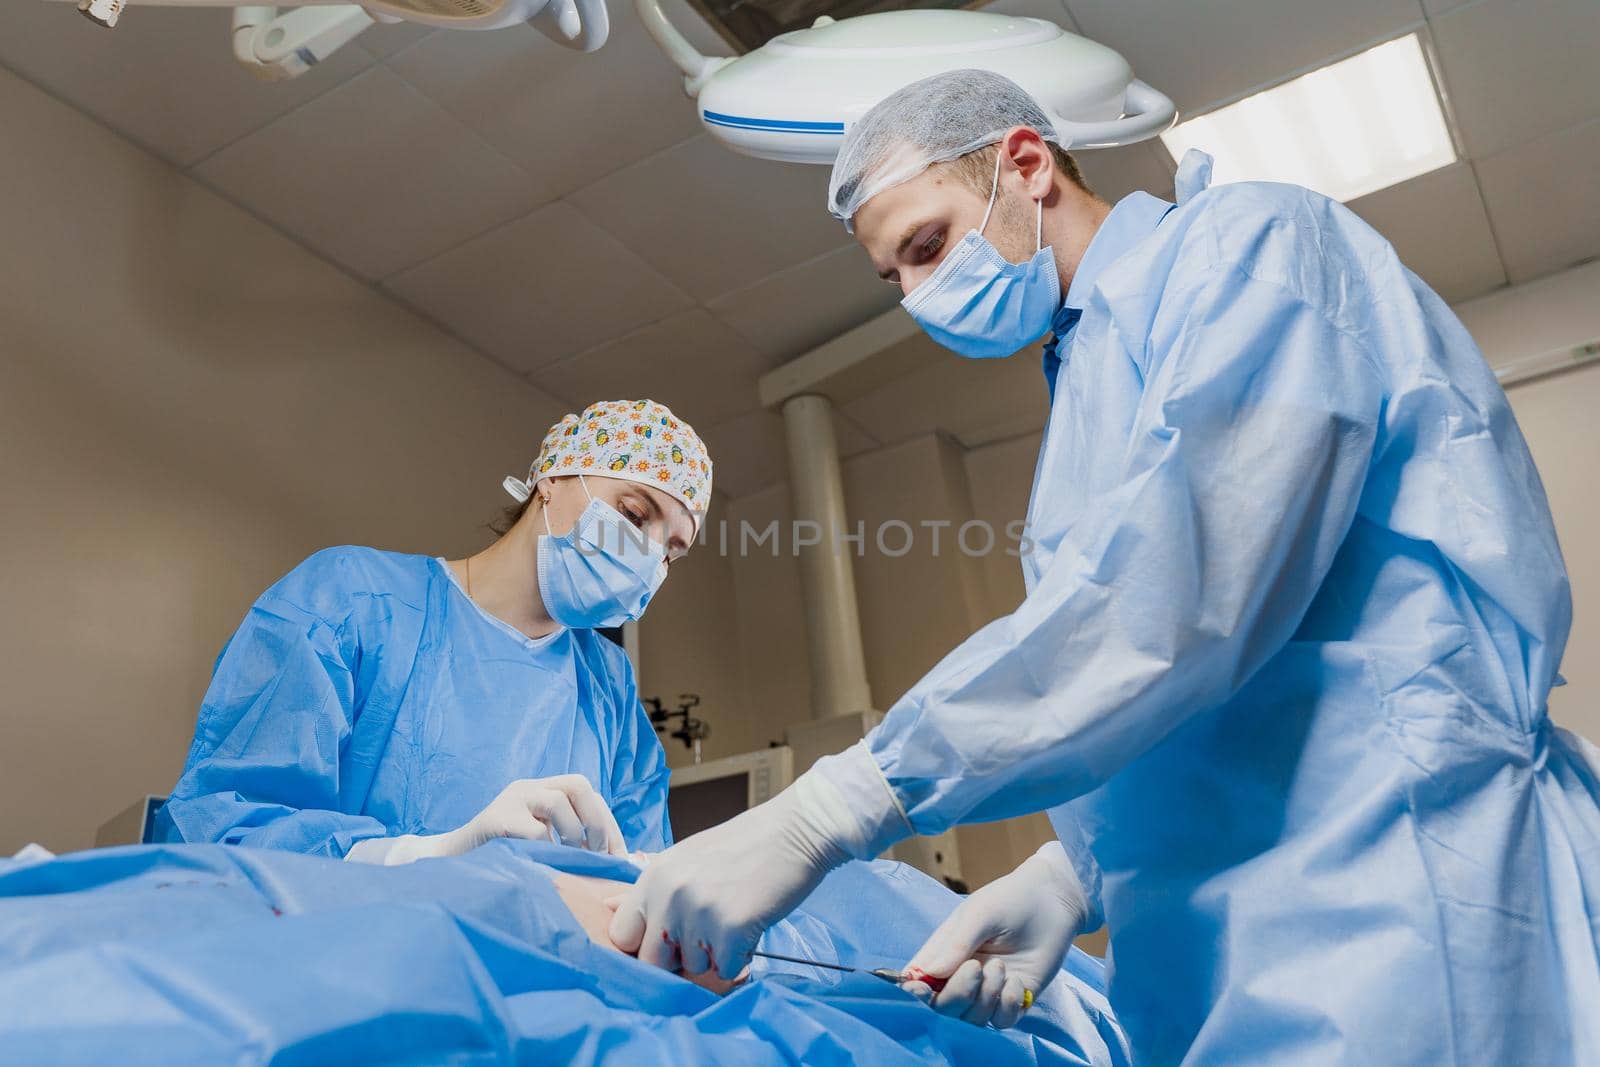 Liposuction for lipofilling surgery operation. 2 surgeon do plastic surgery named blepharoplasty in medical clinic.